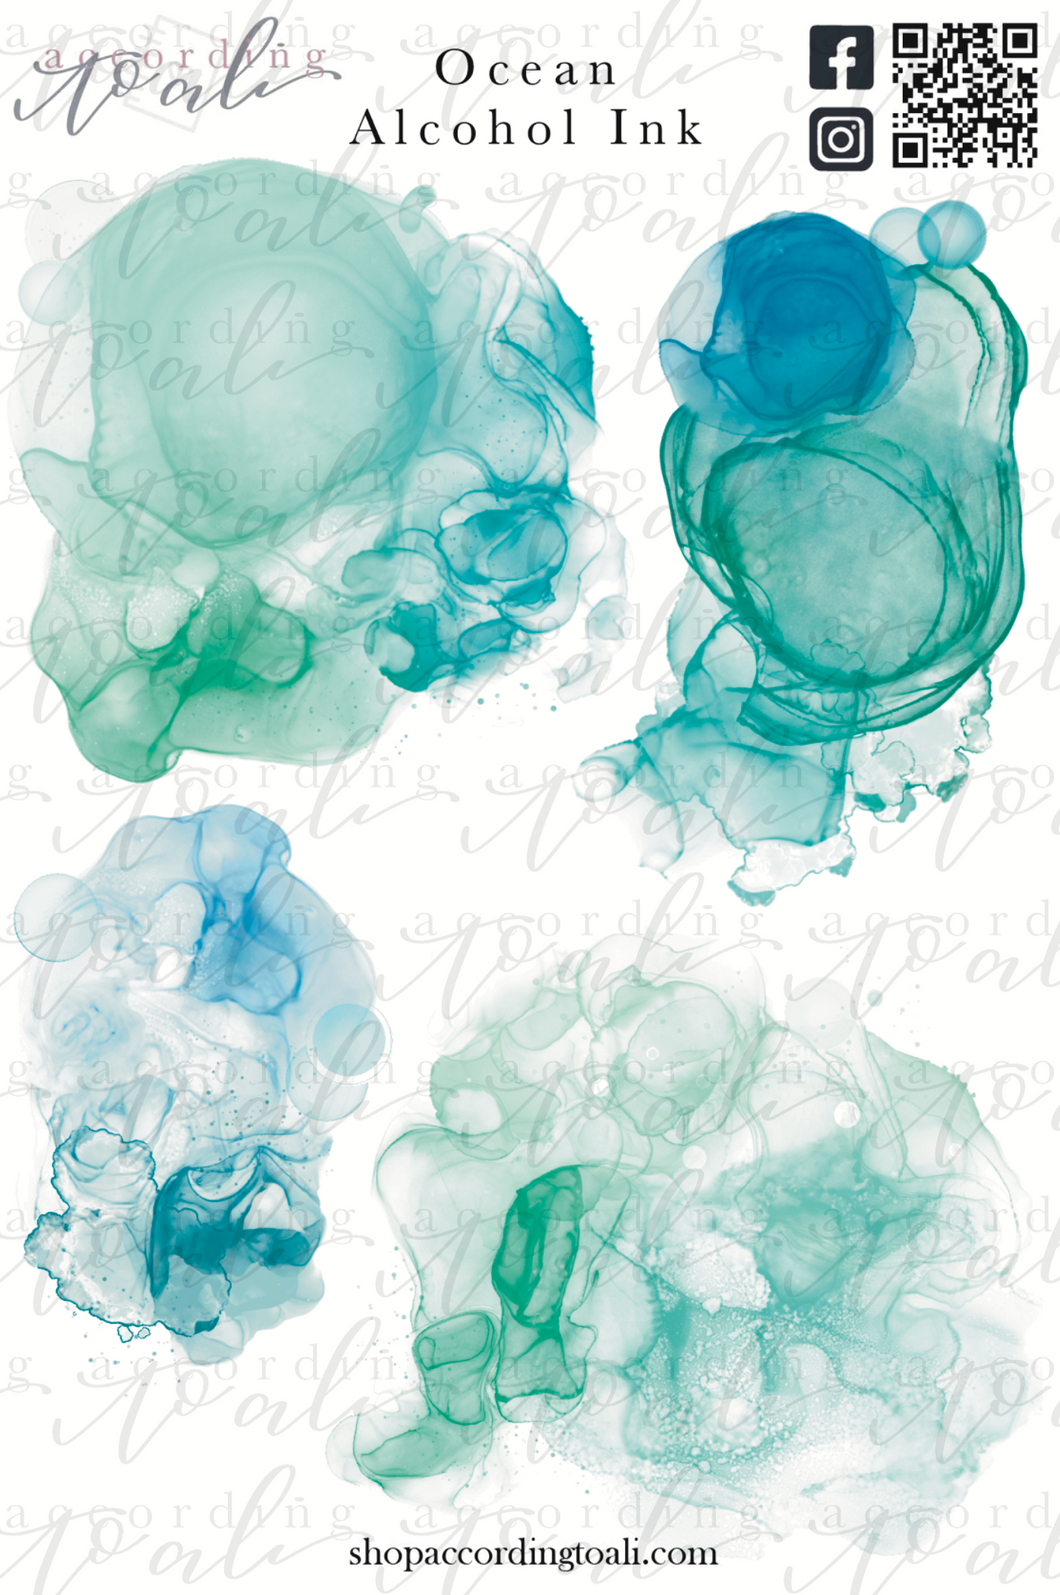 Ocean Alcohol Ink Sticker Sheets